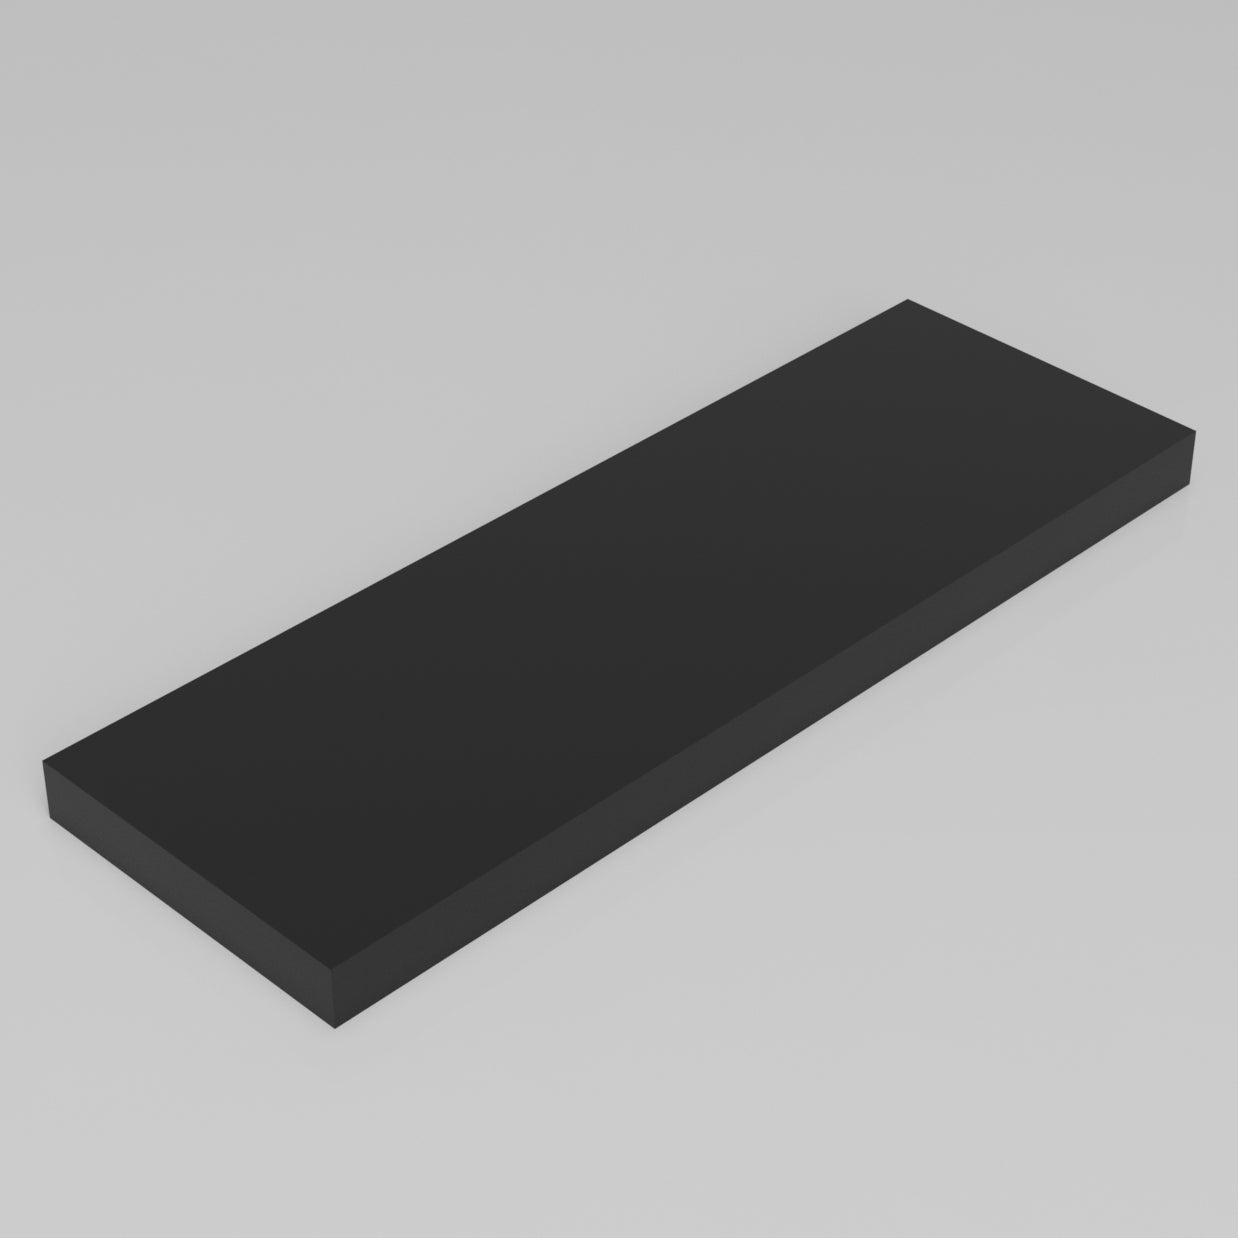 Machinable Wax Rectangular Block Front View 1 Inch by 6 Inch by 18 Inch